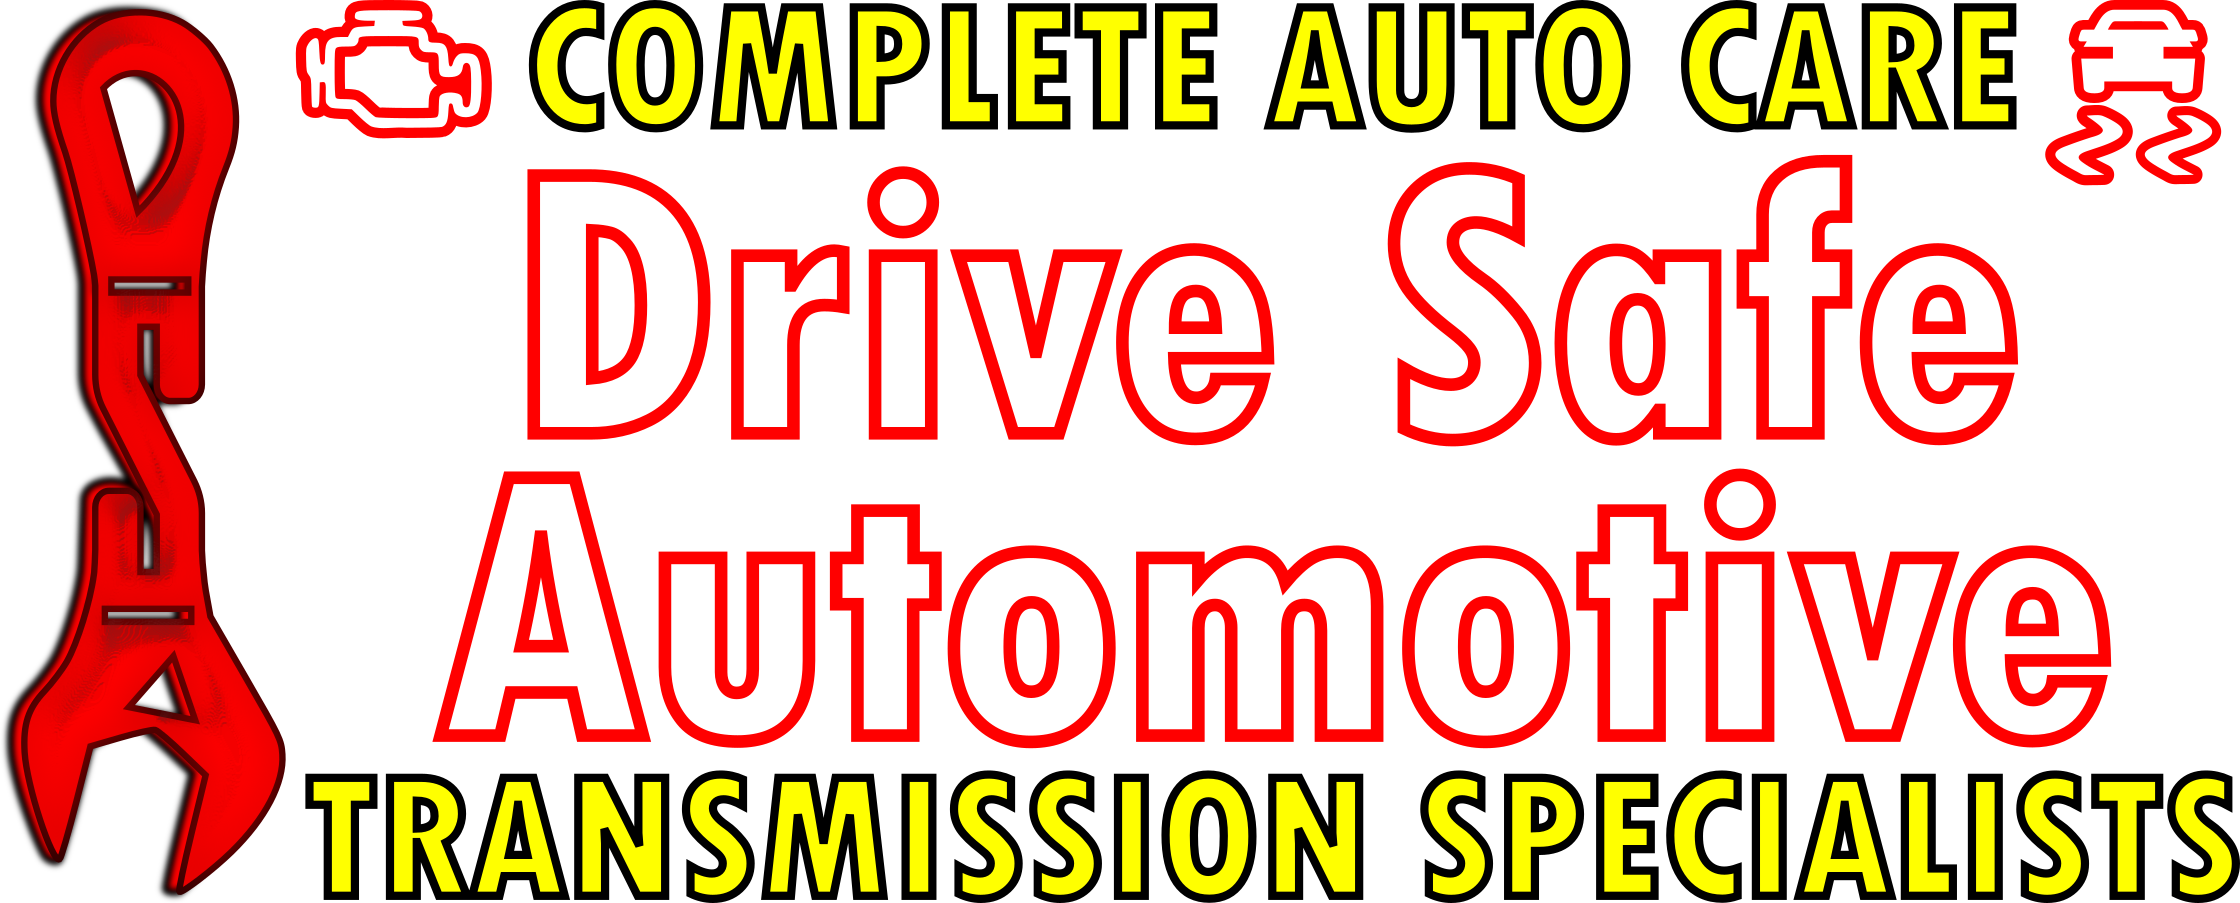 Drive Safe Automotive, Complete Auto Care and transmission specialists.